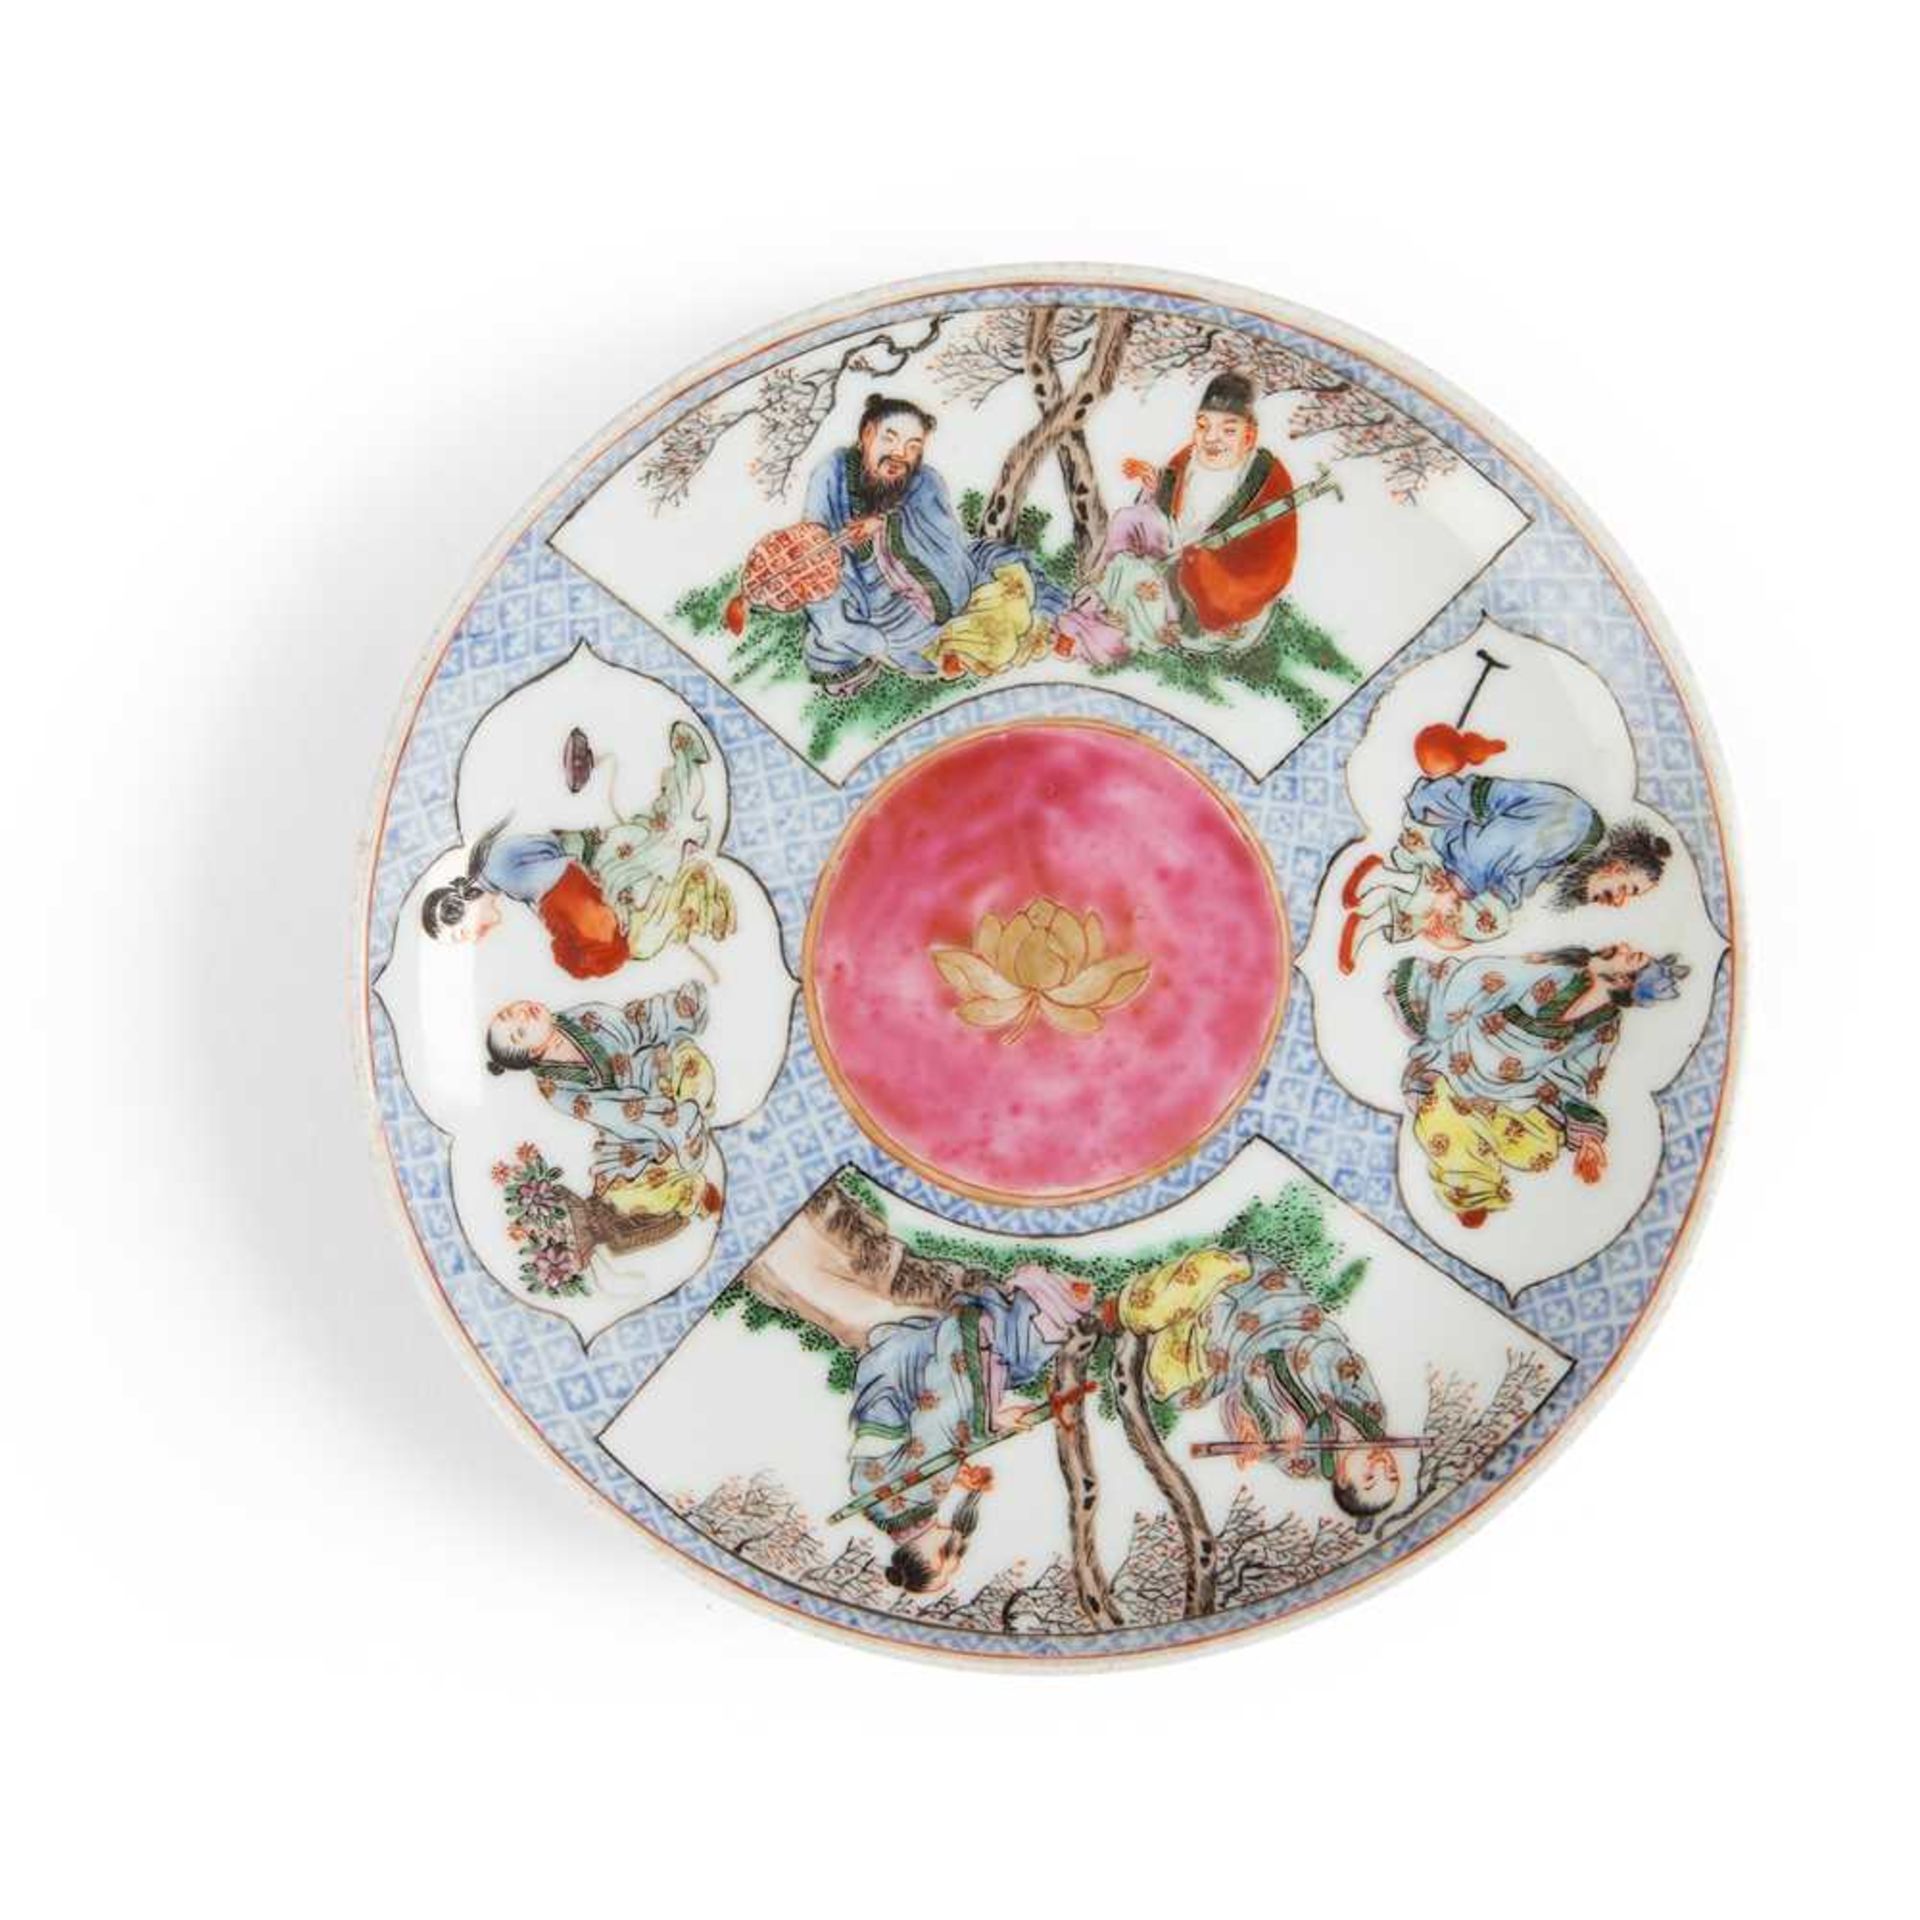 FAMILLE ROSE 'EIGHT IMMORTALS' PLATE QING DYNASTY, 18TH CENTURY